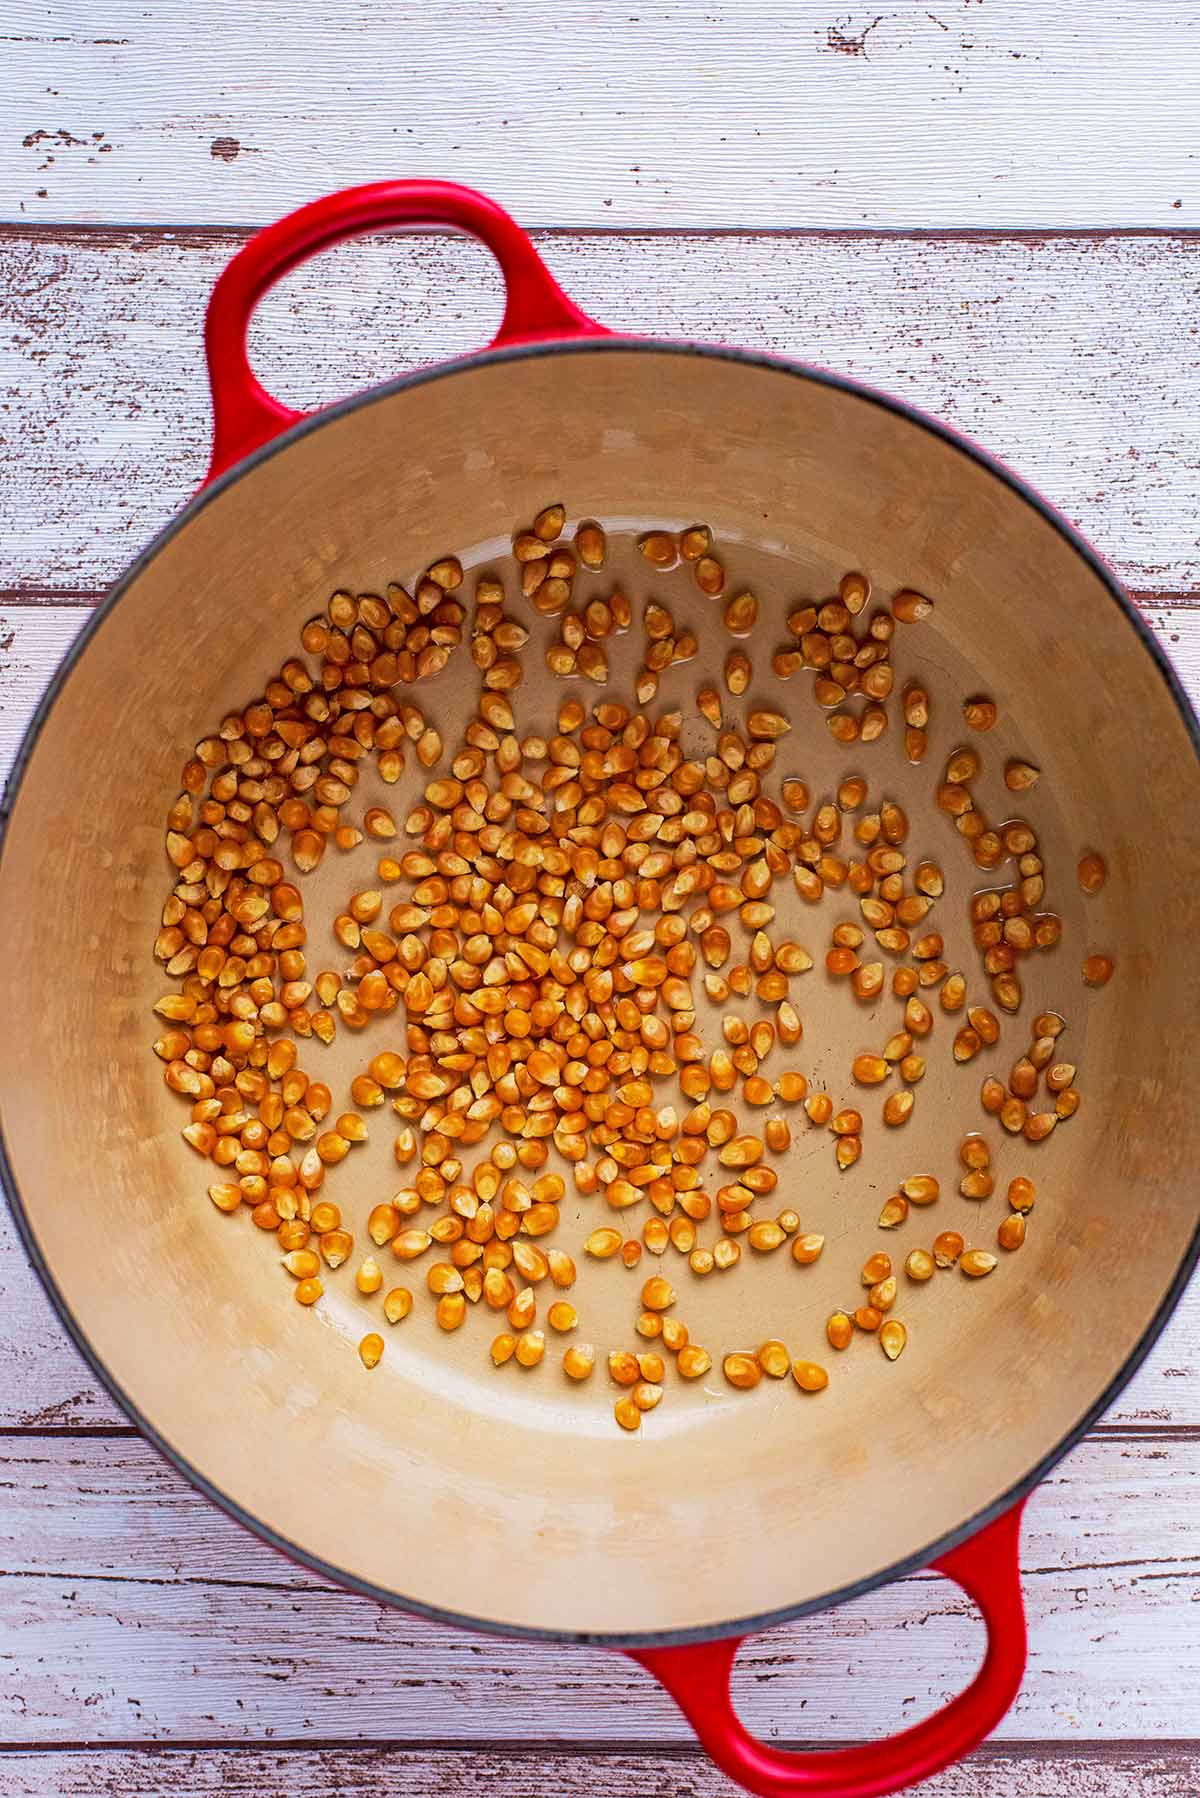 A large red pan containing popcorn kernels.